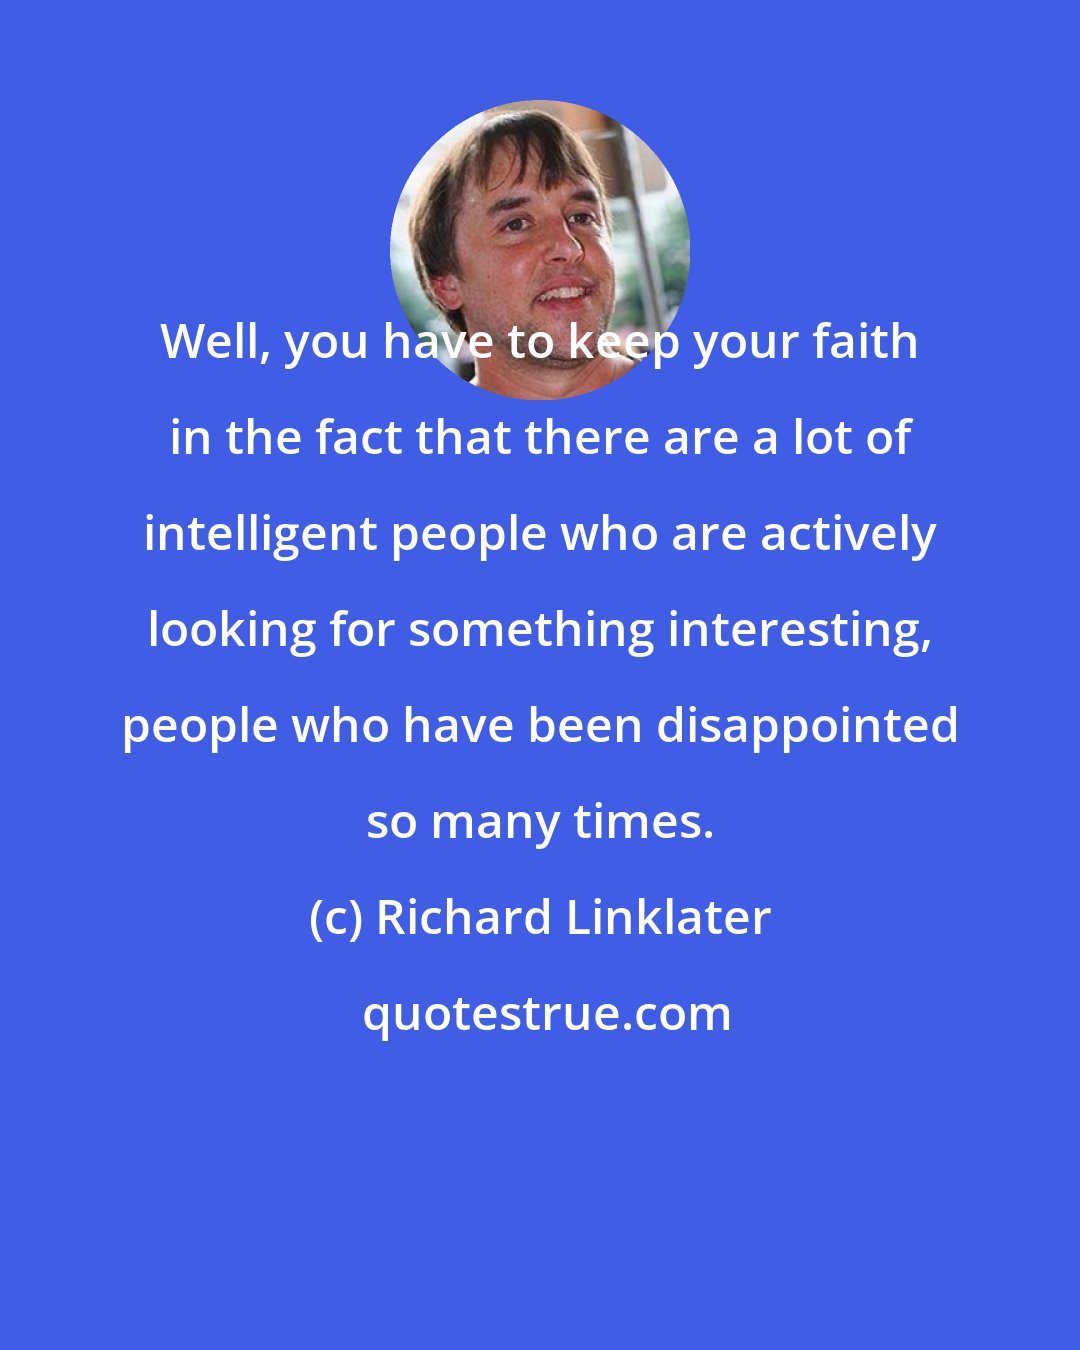 Richard Linklater: Well, you have to keep your faith in the fact that there are a lot of intelligent people who are actively looking for something interesting, people who have been disappointed so many times.